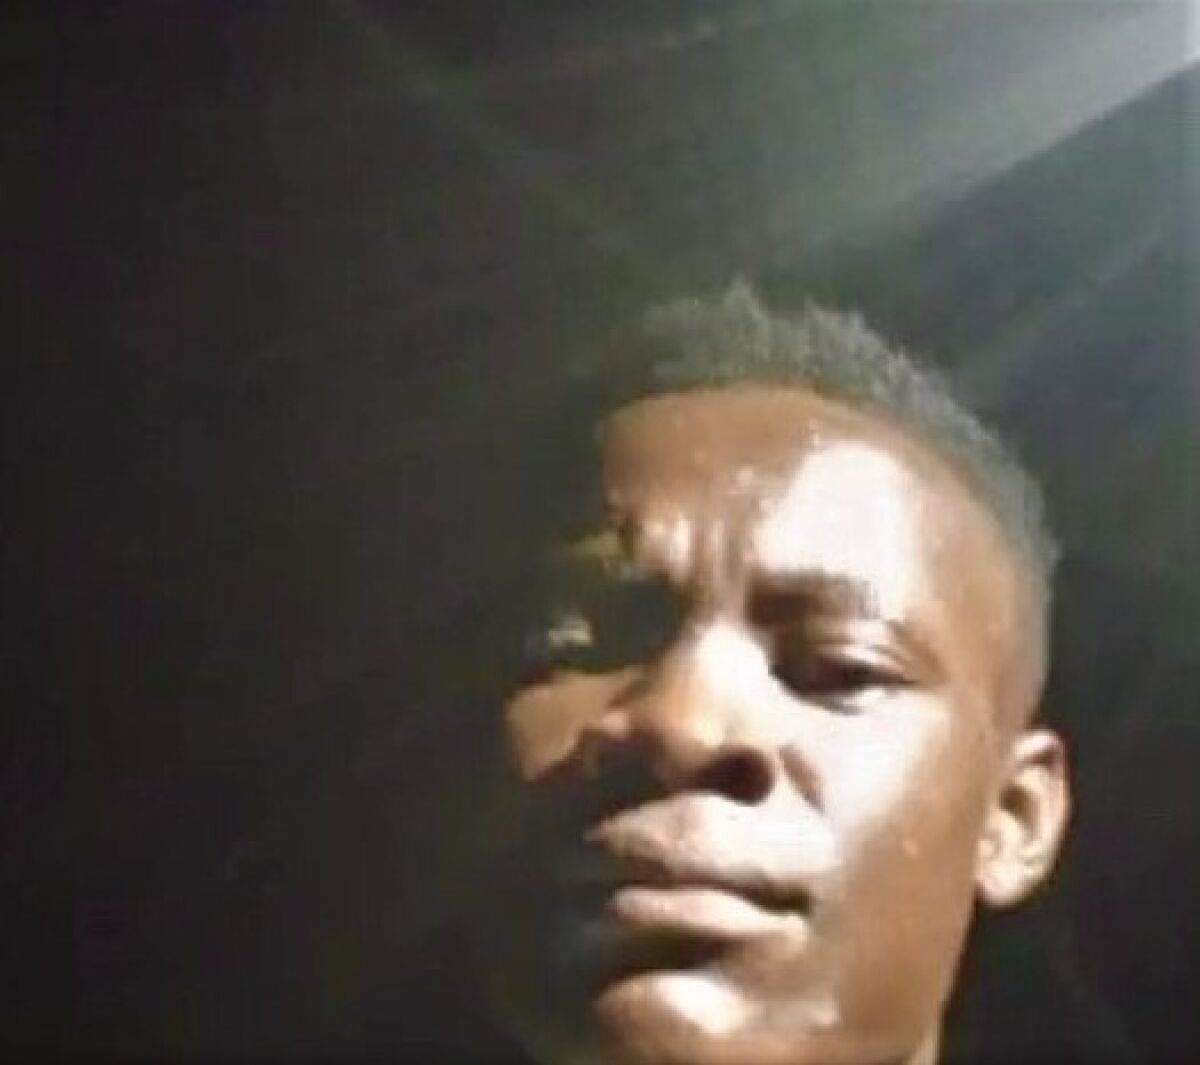 This image popped up when Tristan King did a reverse Instagram video call to see who had stolen his identity. 